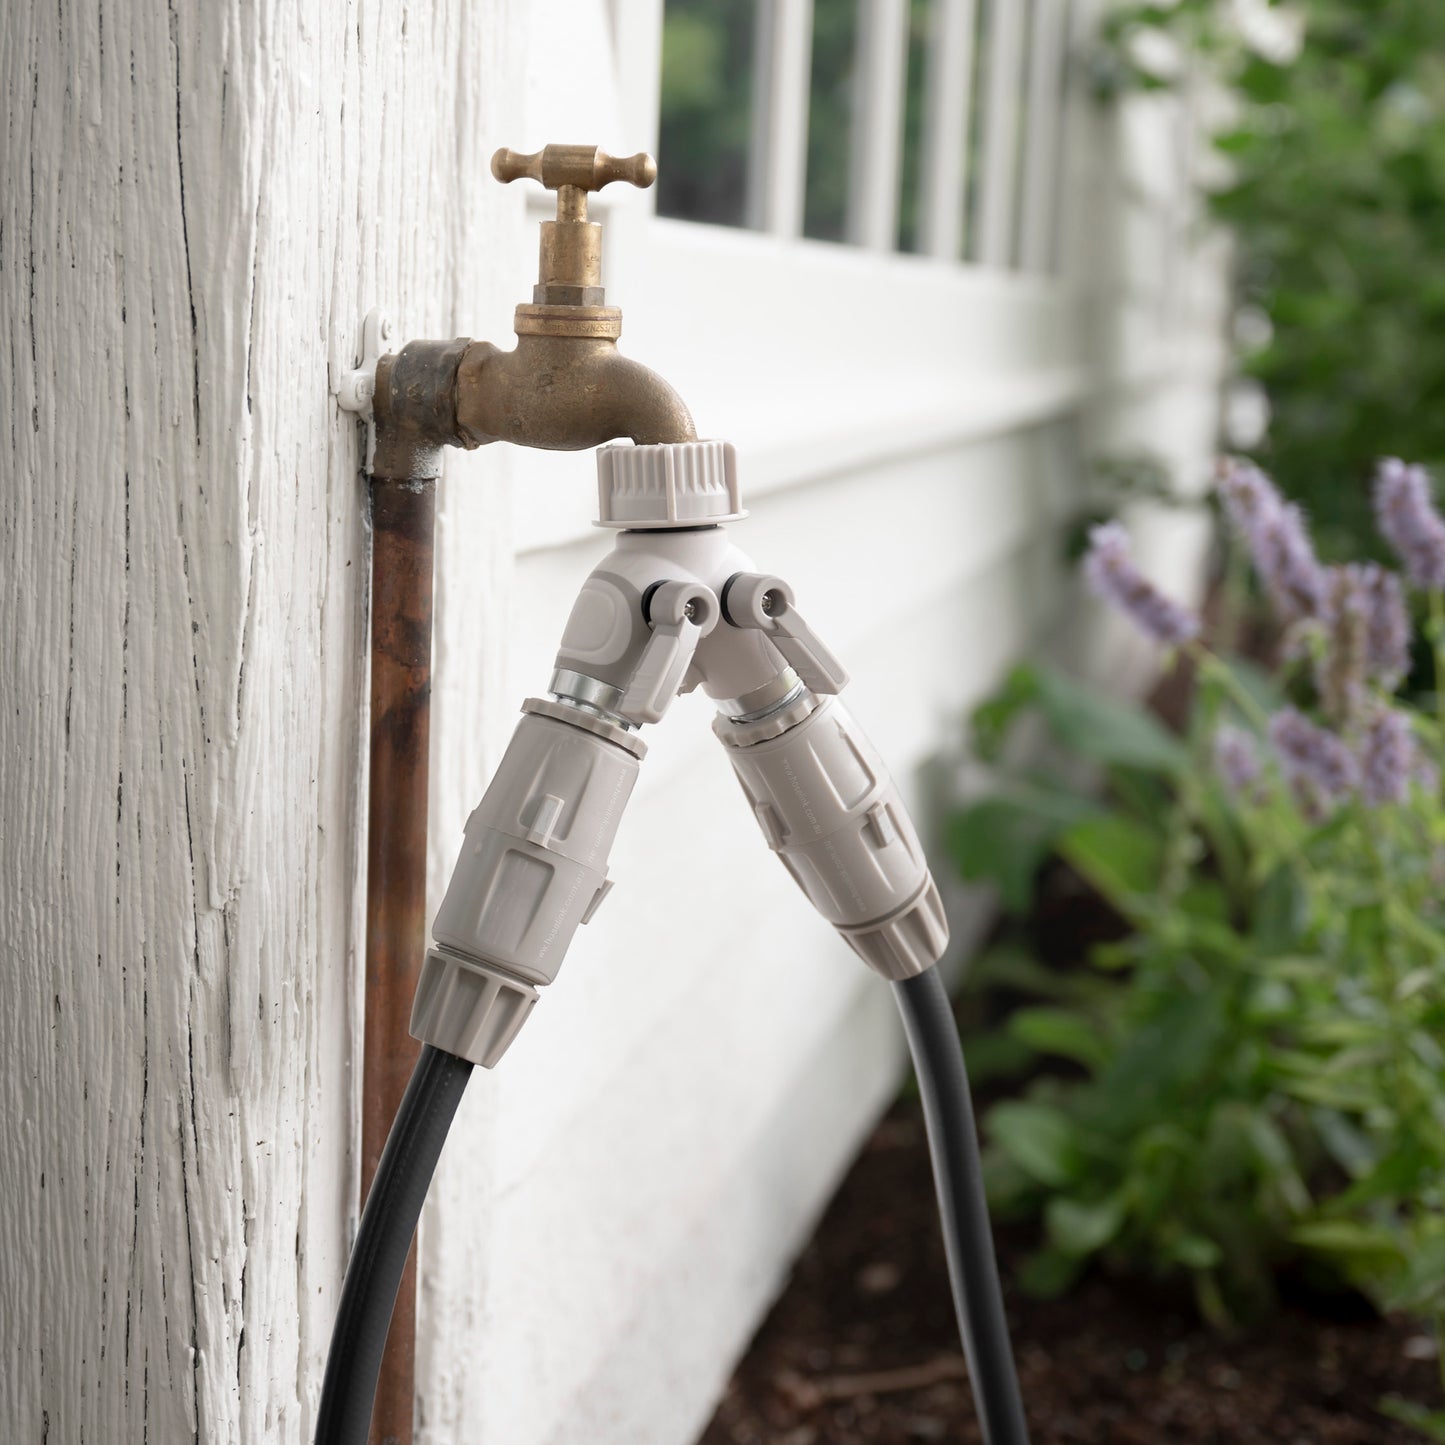 Easy Turn 2-Way Tap Adapter on faucet attached to hoses